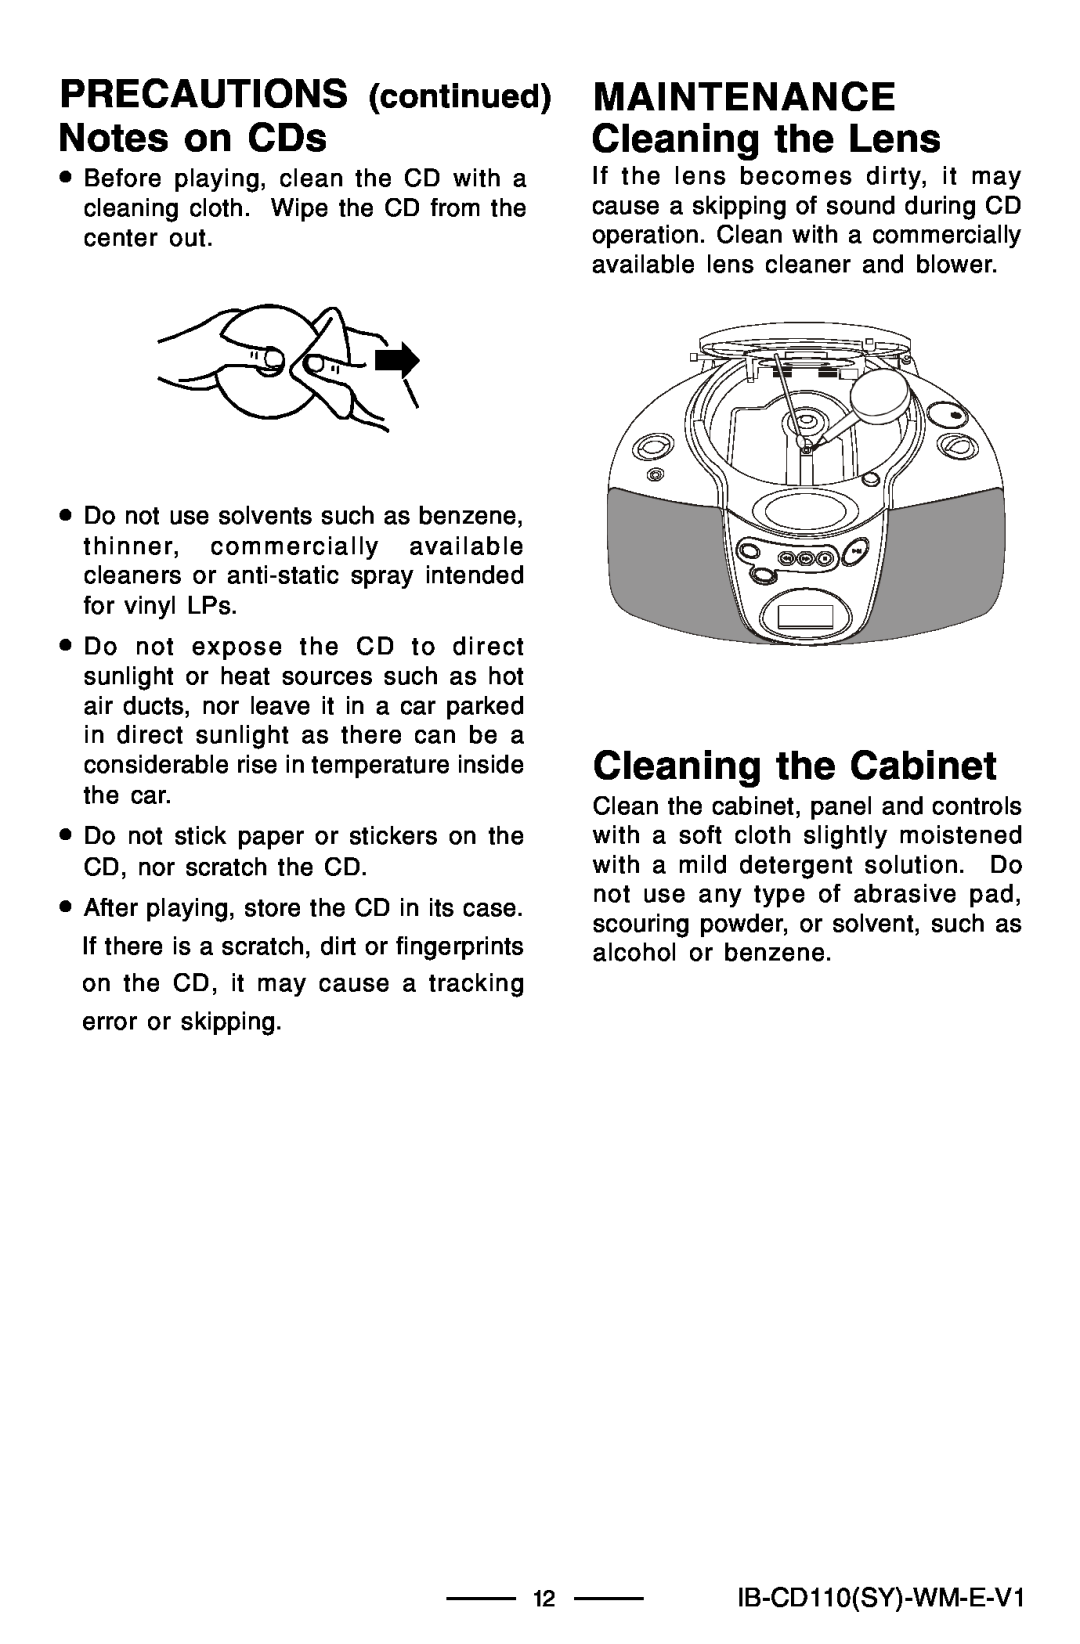 Lenoxx Electronics CD-110 manual PRECAUTIONS continued Notes on CDs, MAINTENANCE Cleaning the Lens, Cleaning the Cabinet 